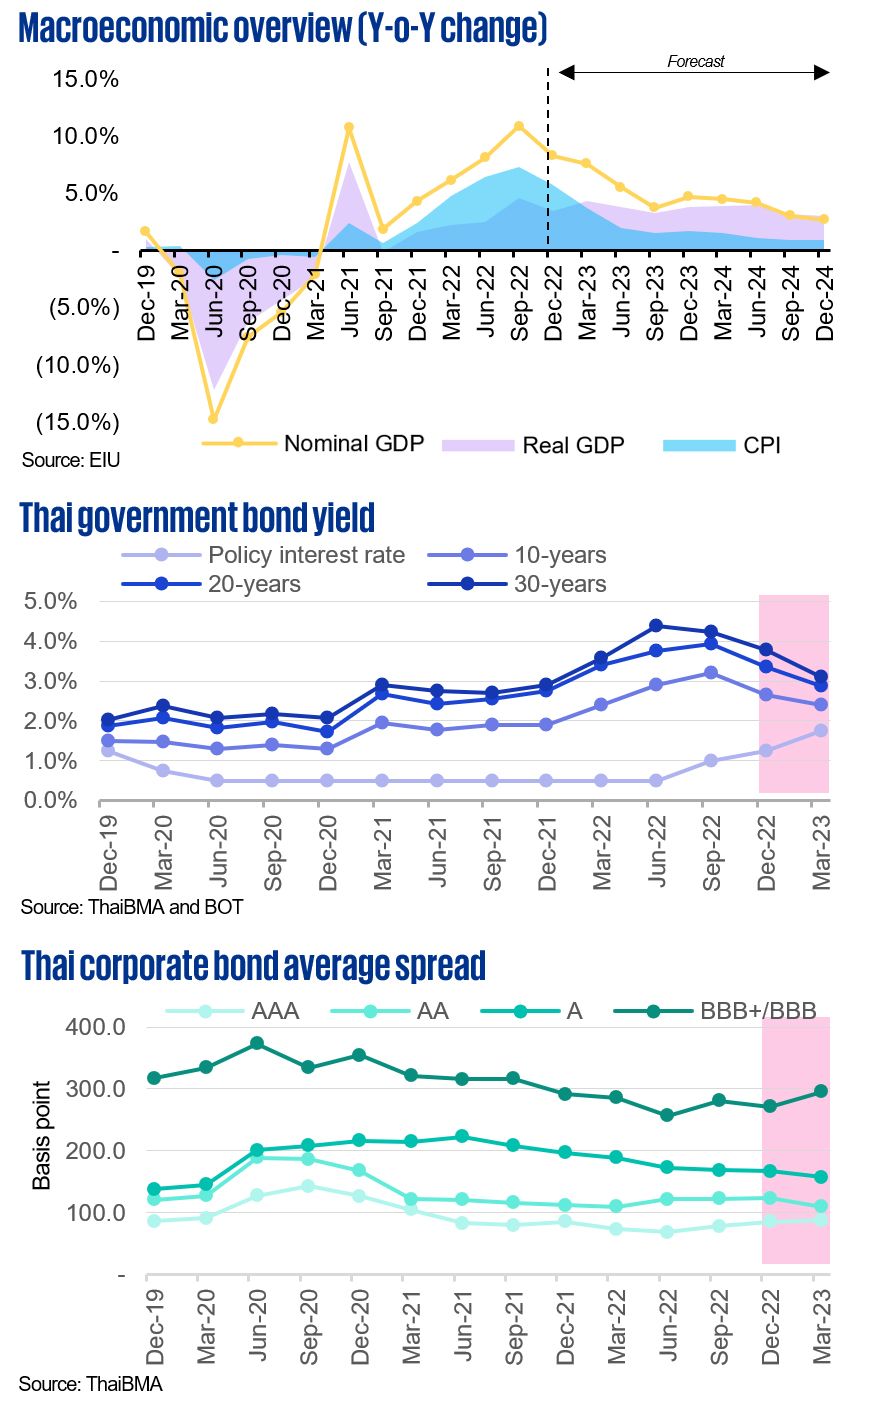 Thai capital market outlook - overview